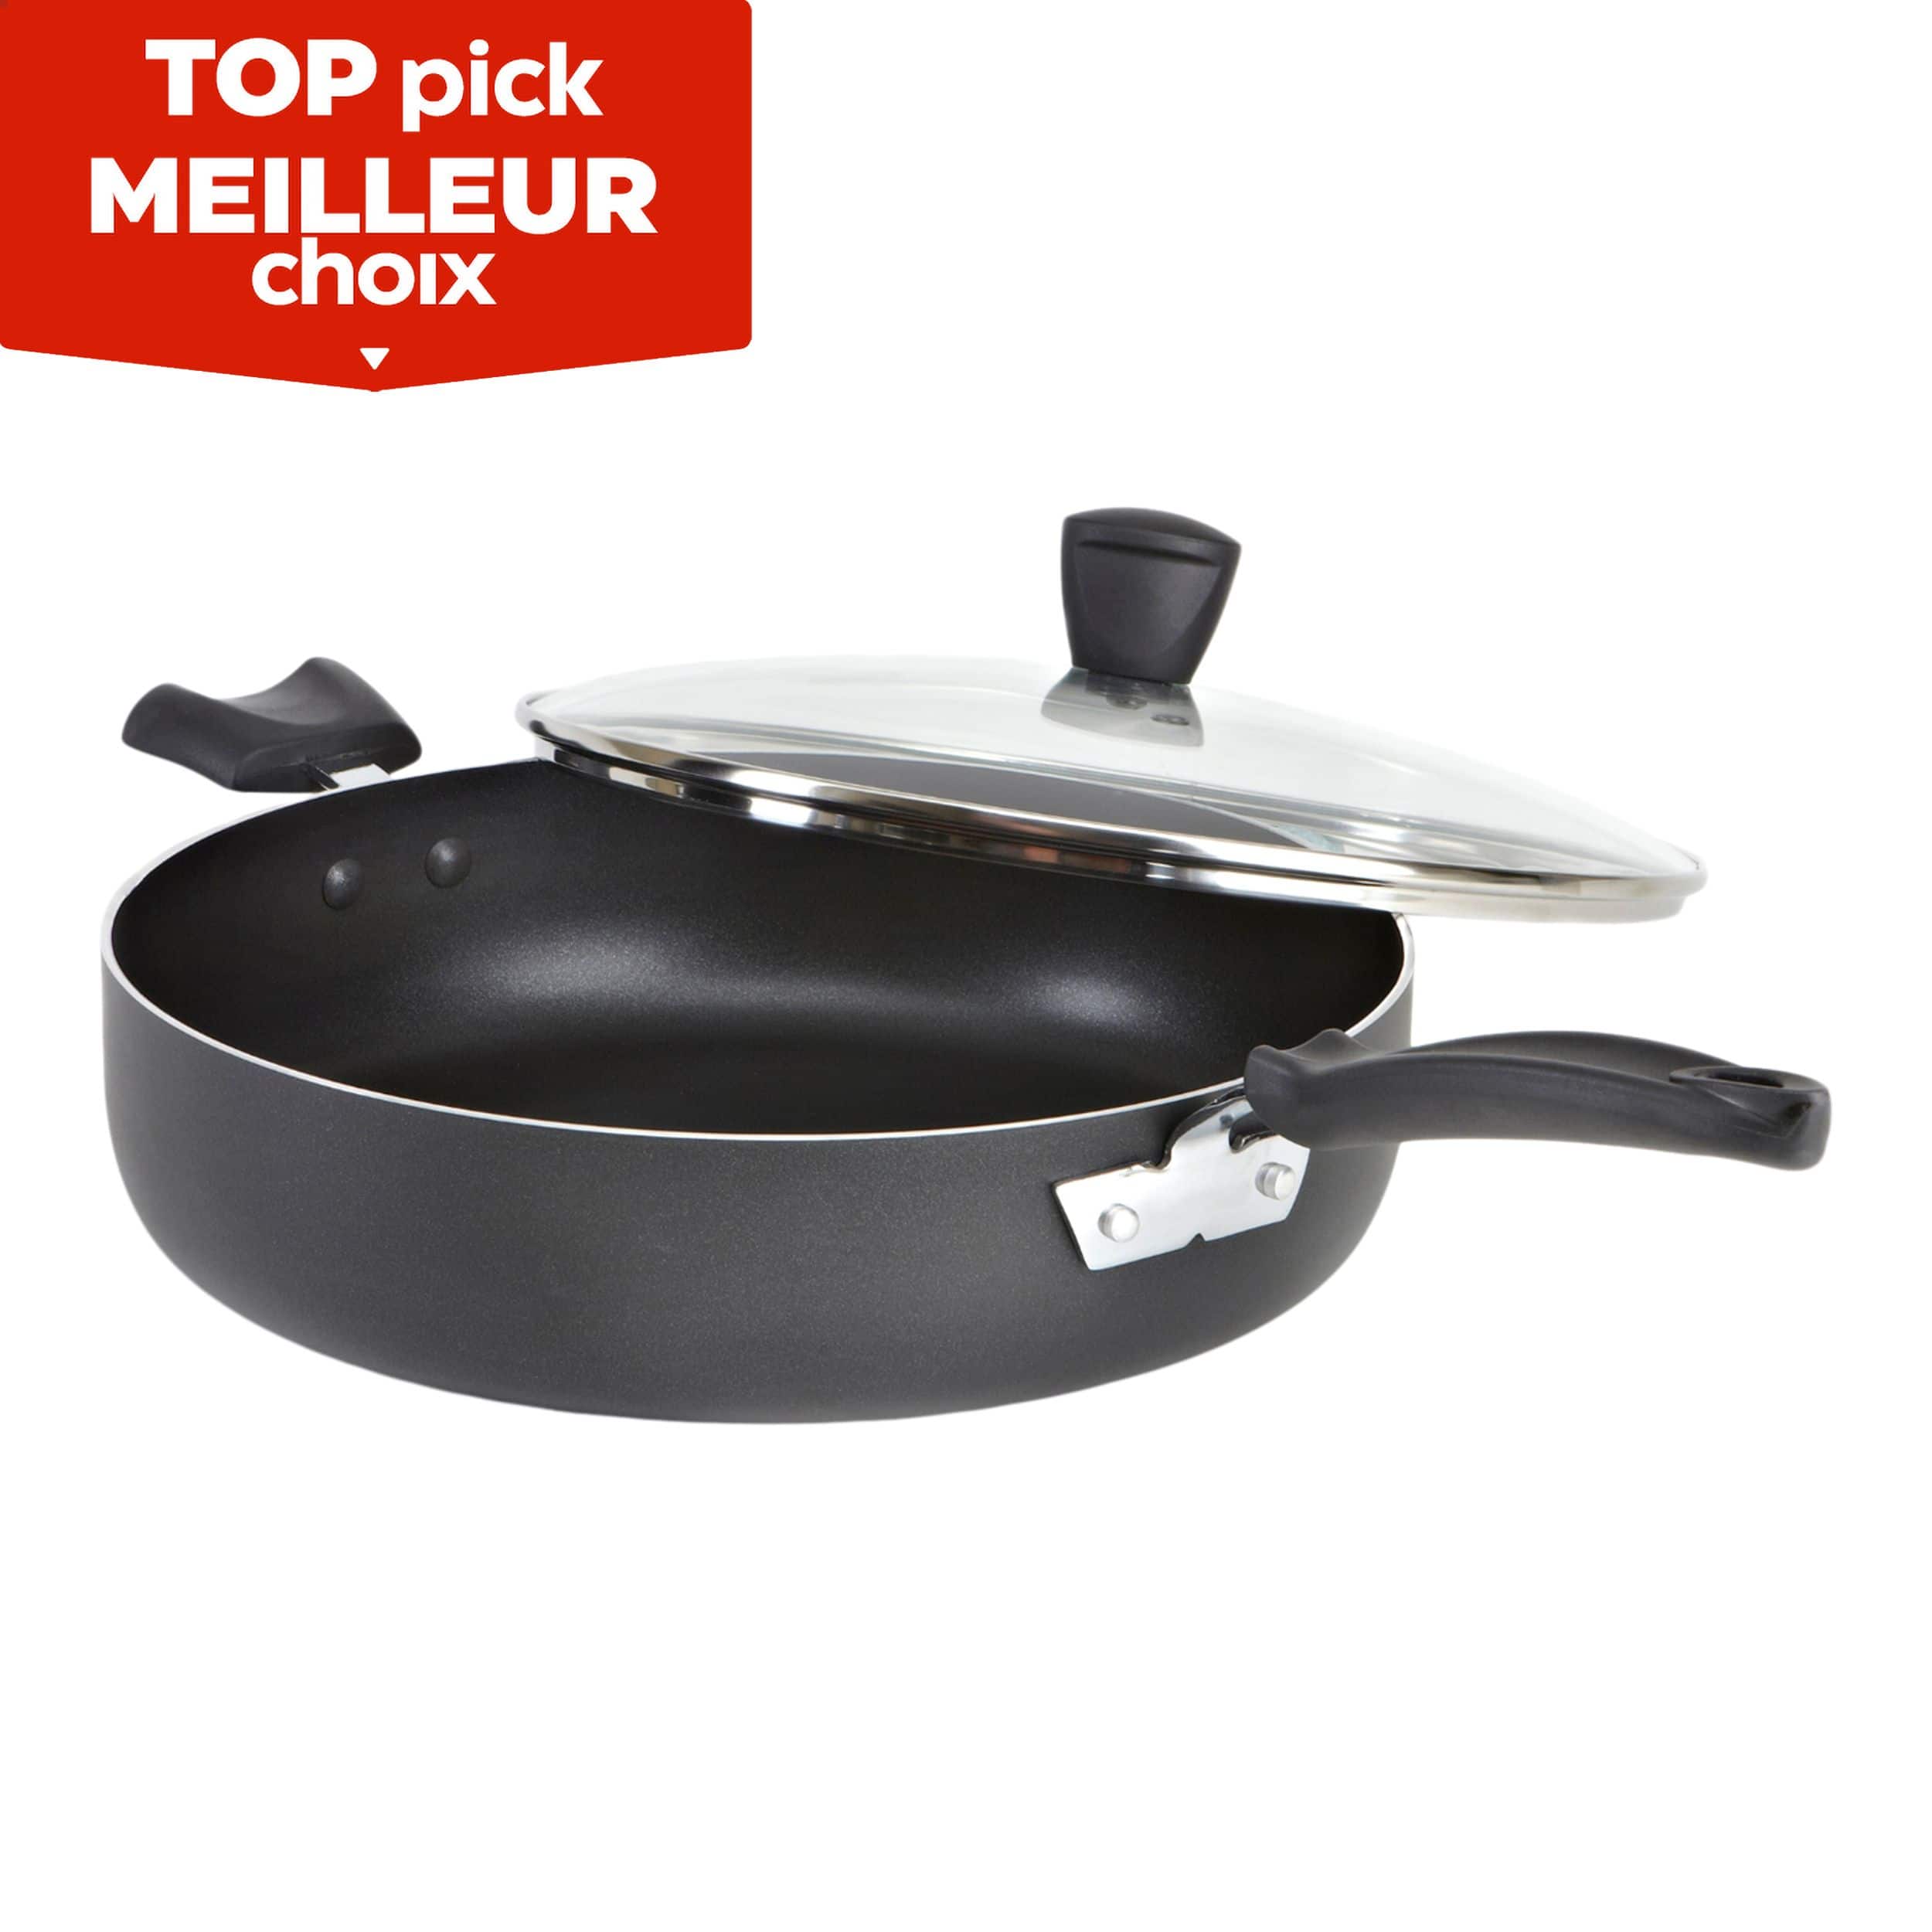 T-fal Platinum Nonstick Jumbo Cooker with Induction Base, Unlimited Cookware  Collection, 5 quart 